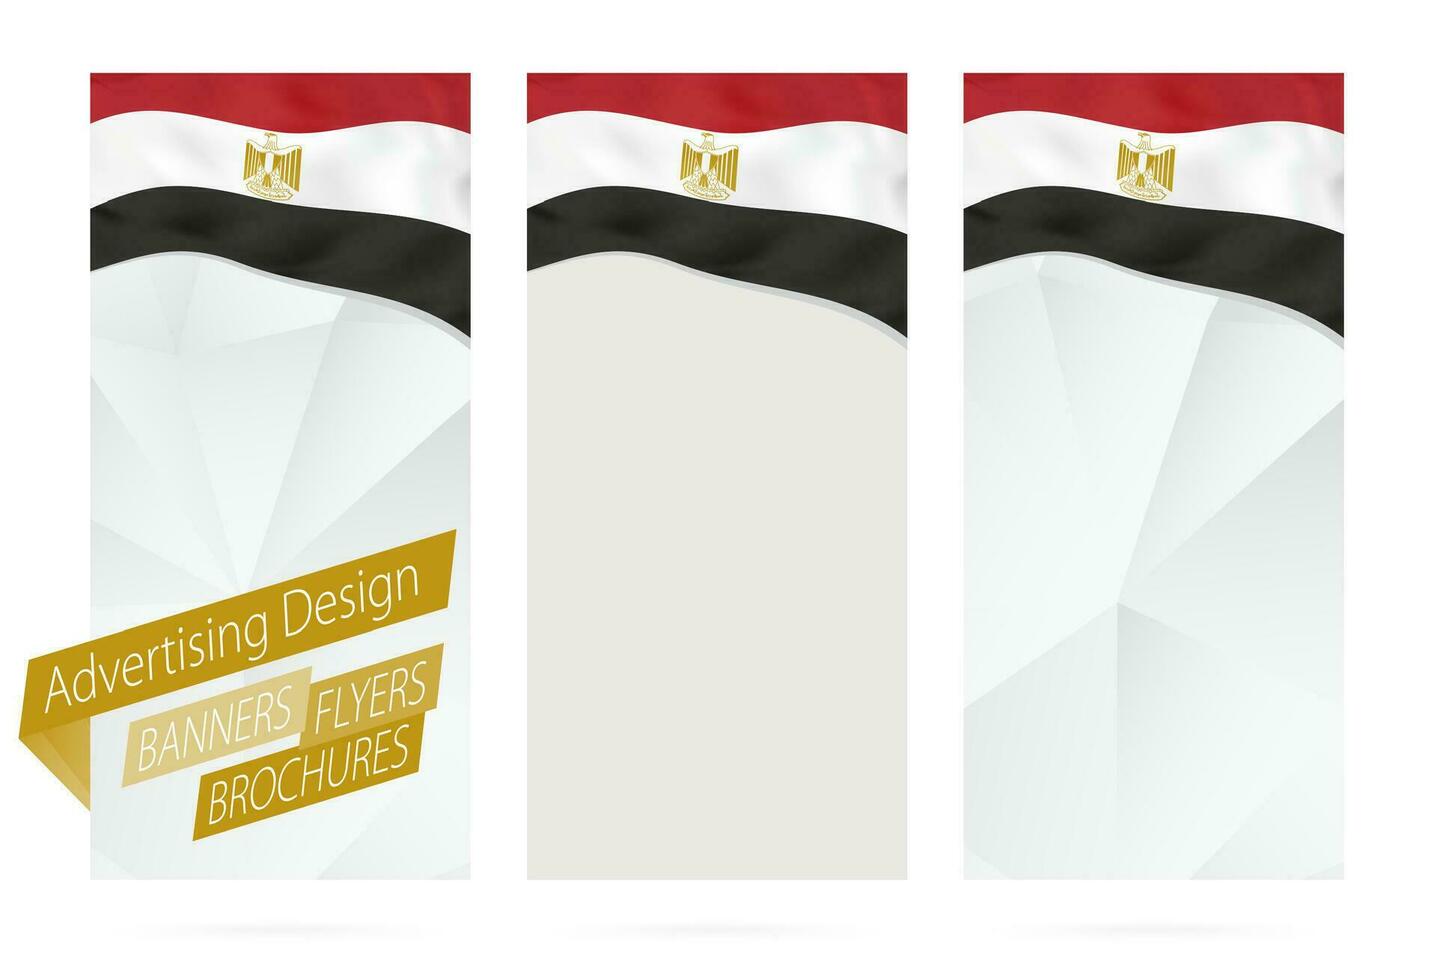 Design of banners, flyers, brochures with flag of Egypt. vector